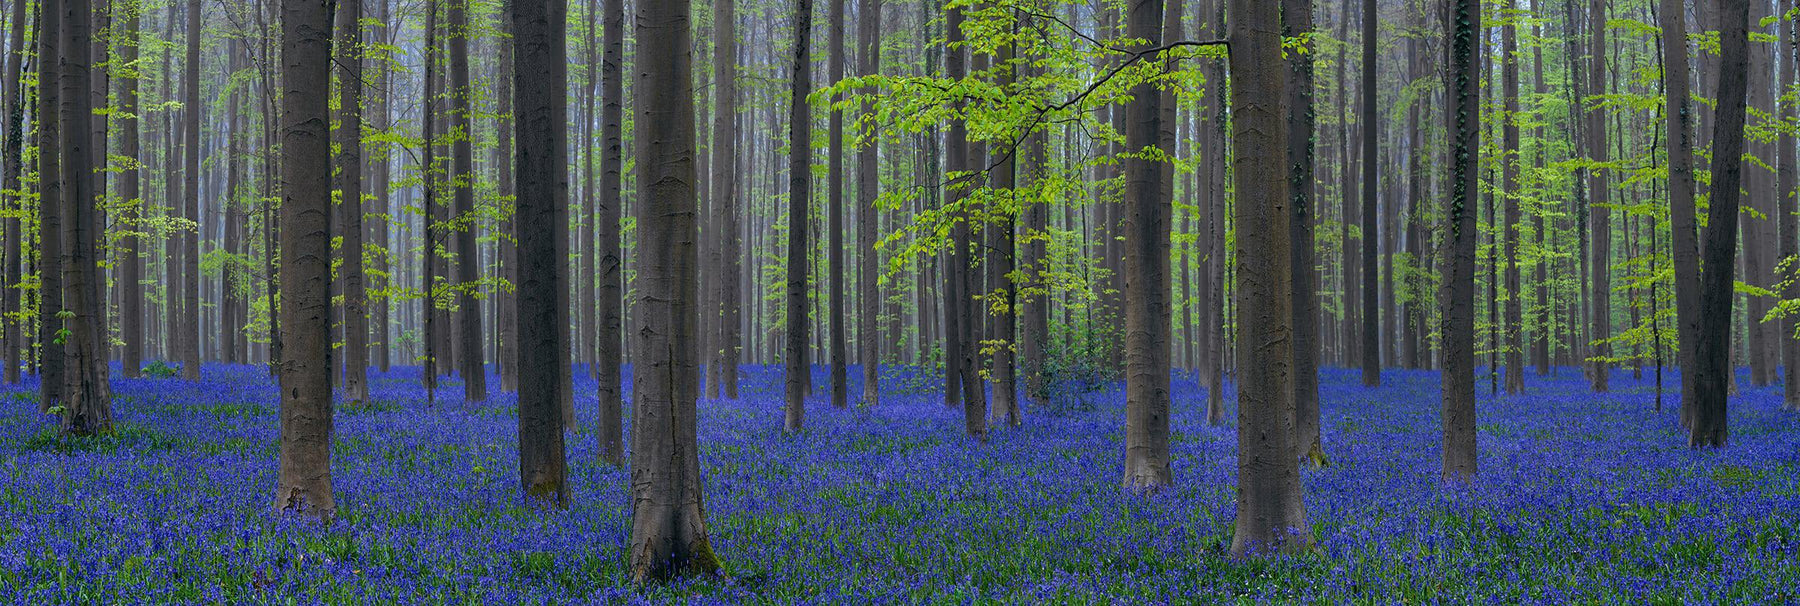 Forest with bright green leaves in Brussels Belgium filled with purple wildflowers 